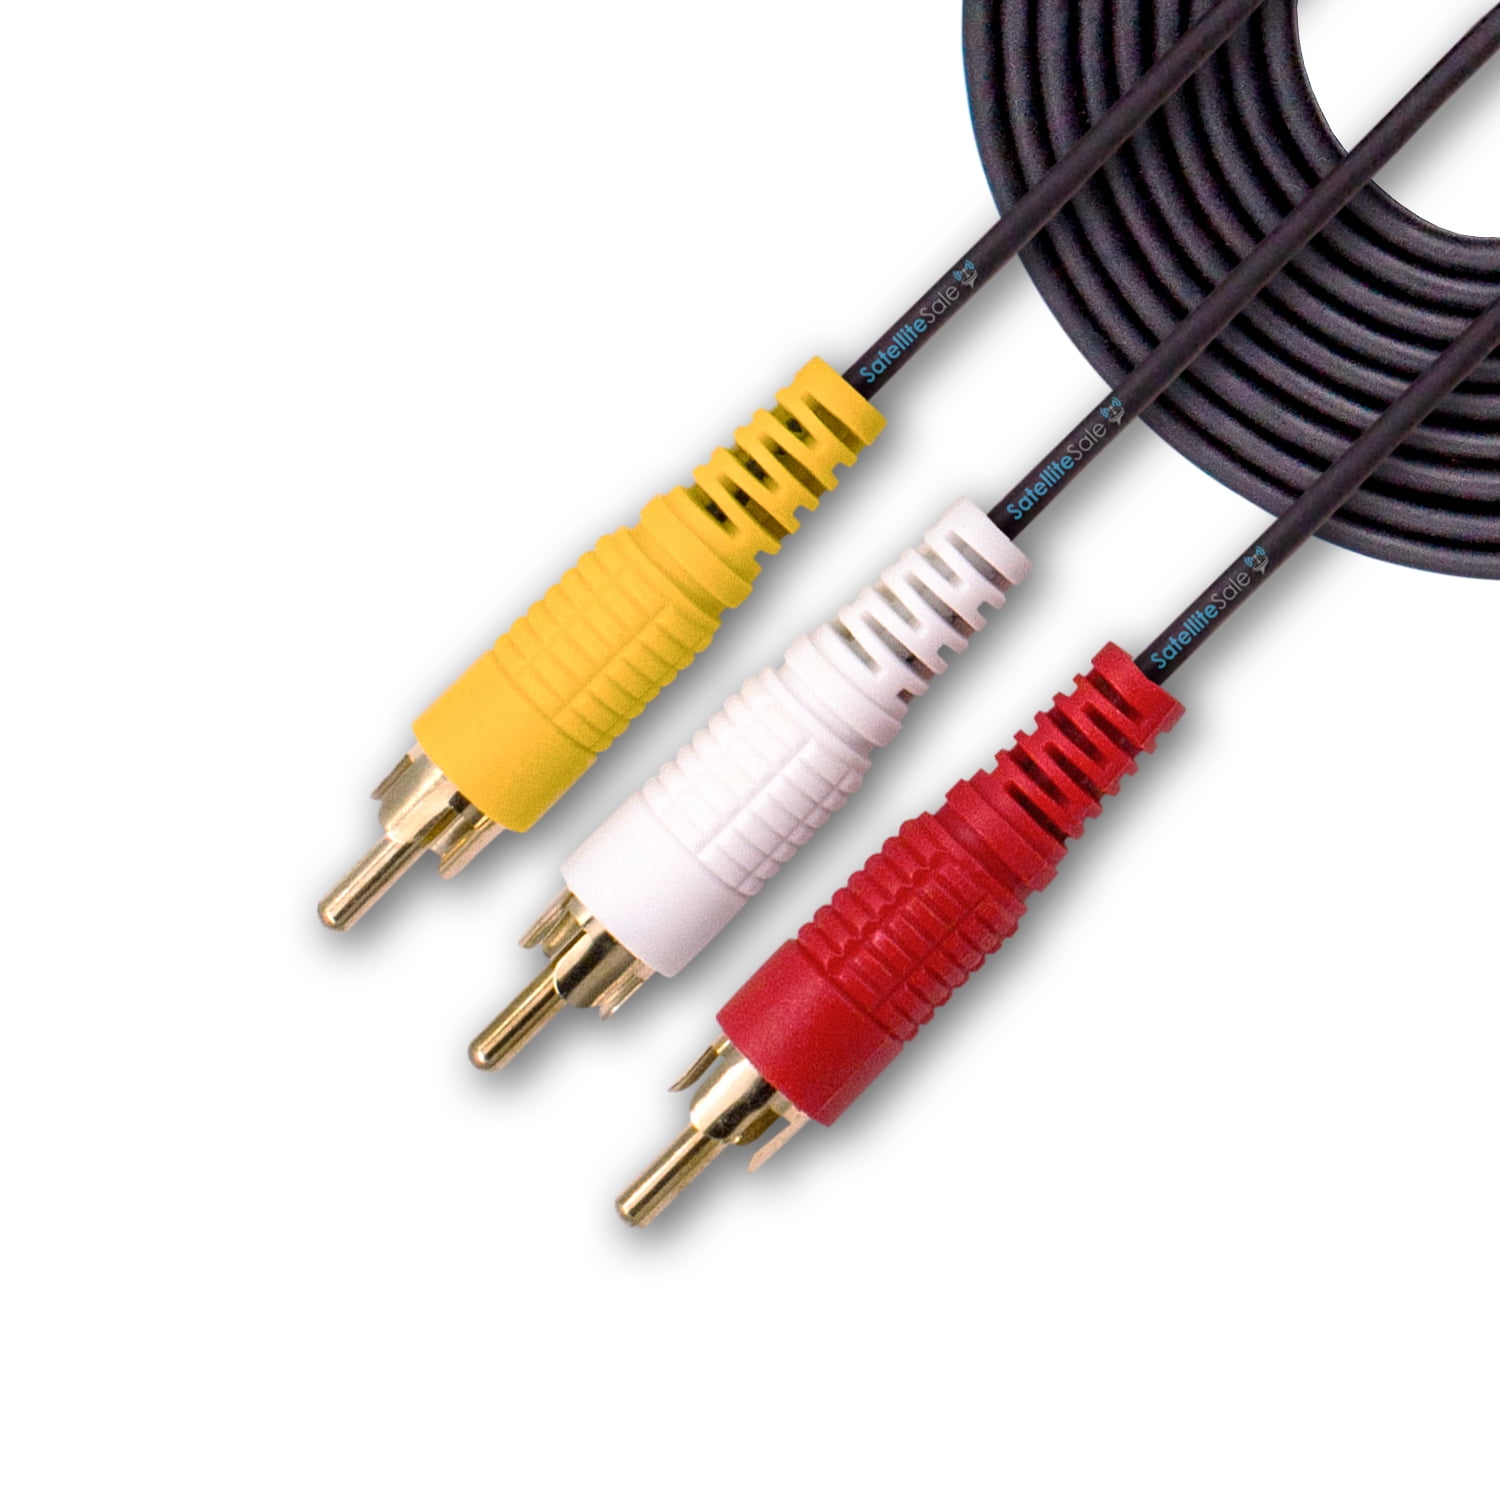 Compatible With All Devices Carrying RCA Output Ports Signal GE 12-Feet Digital Video Component Cable Silver Up To 1080p 